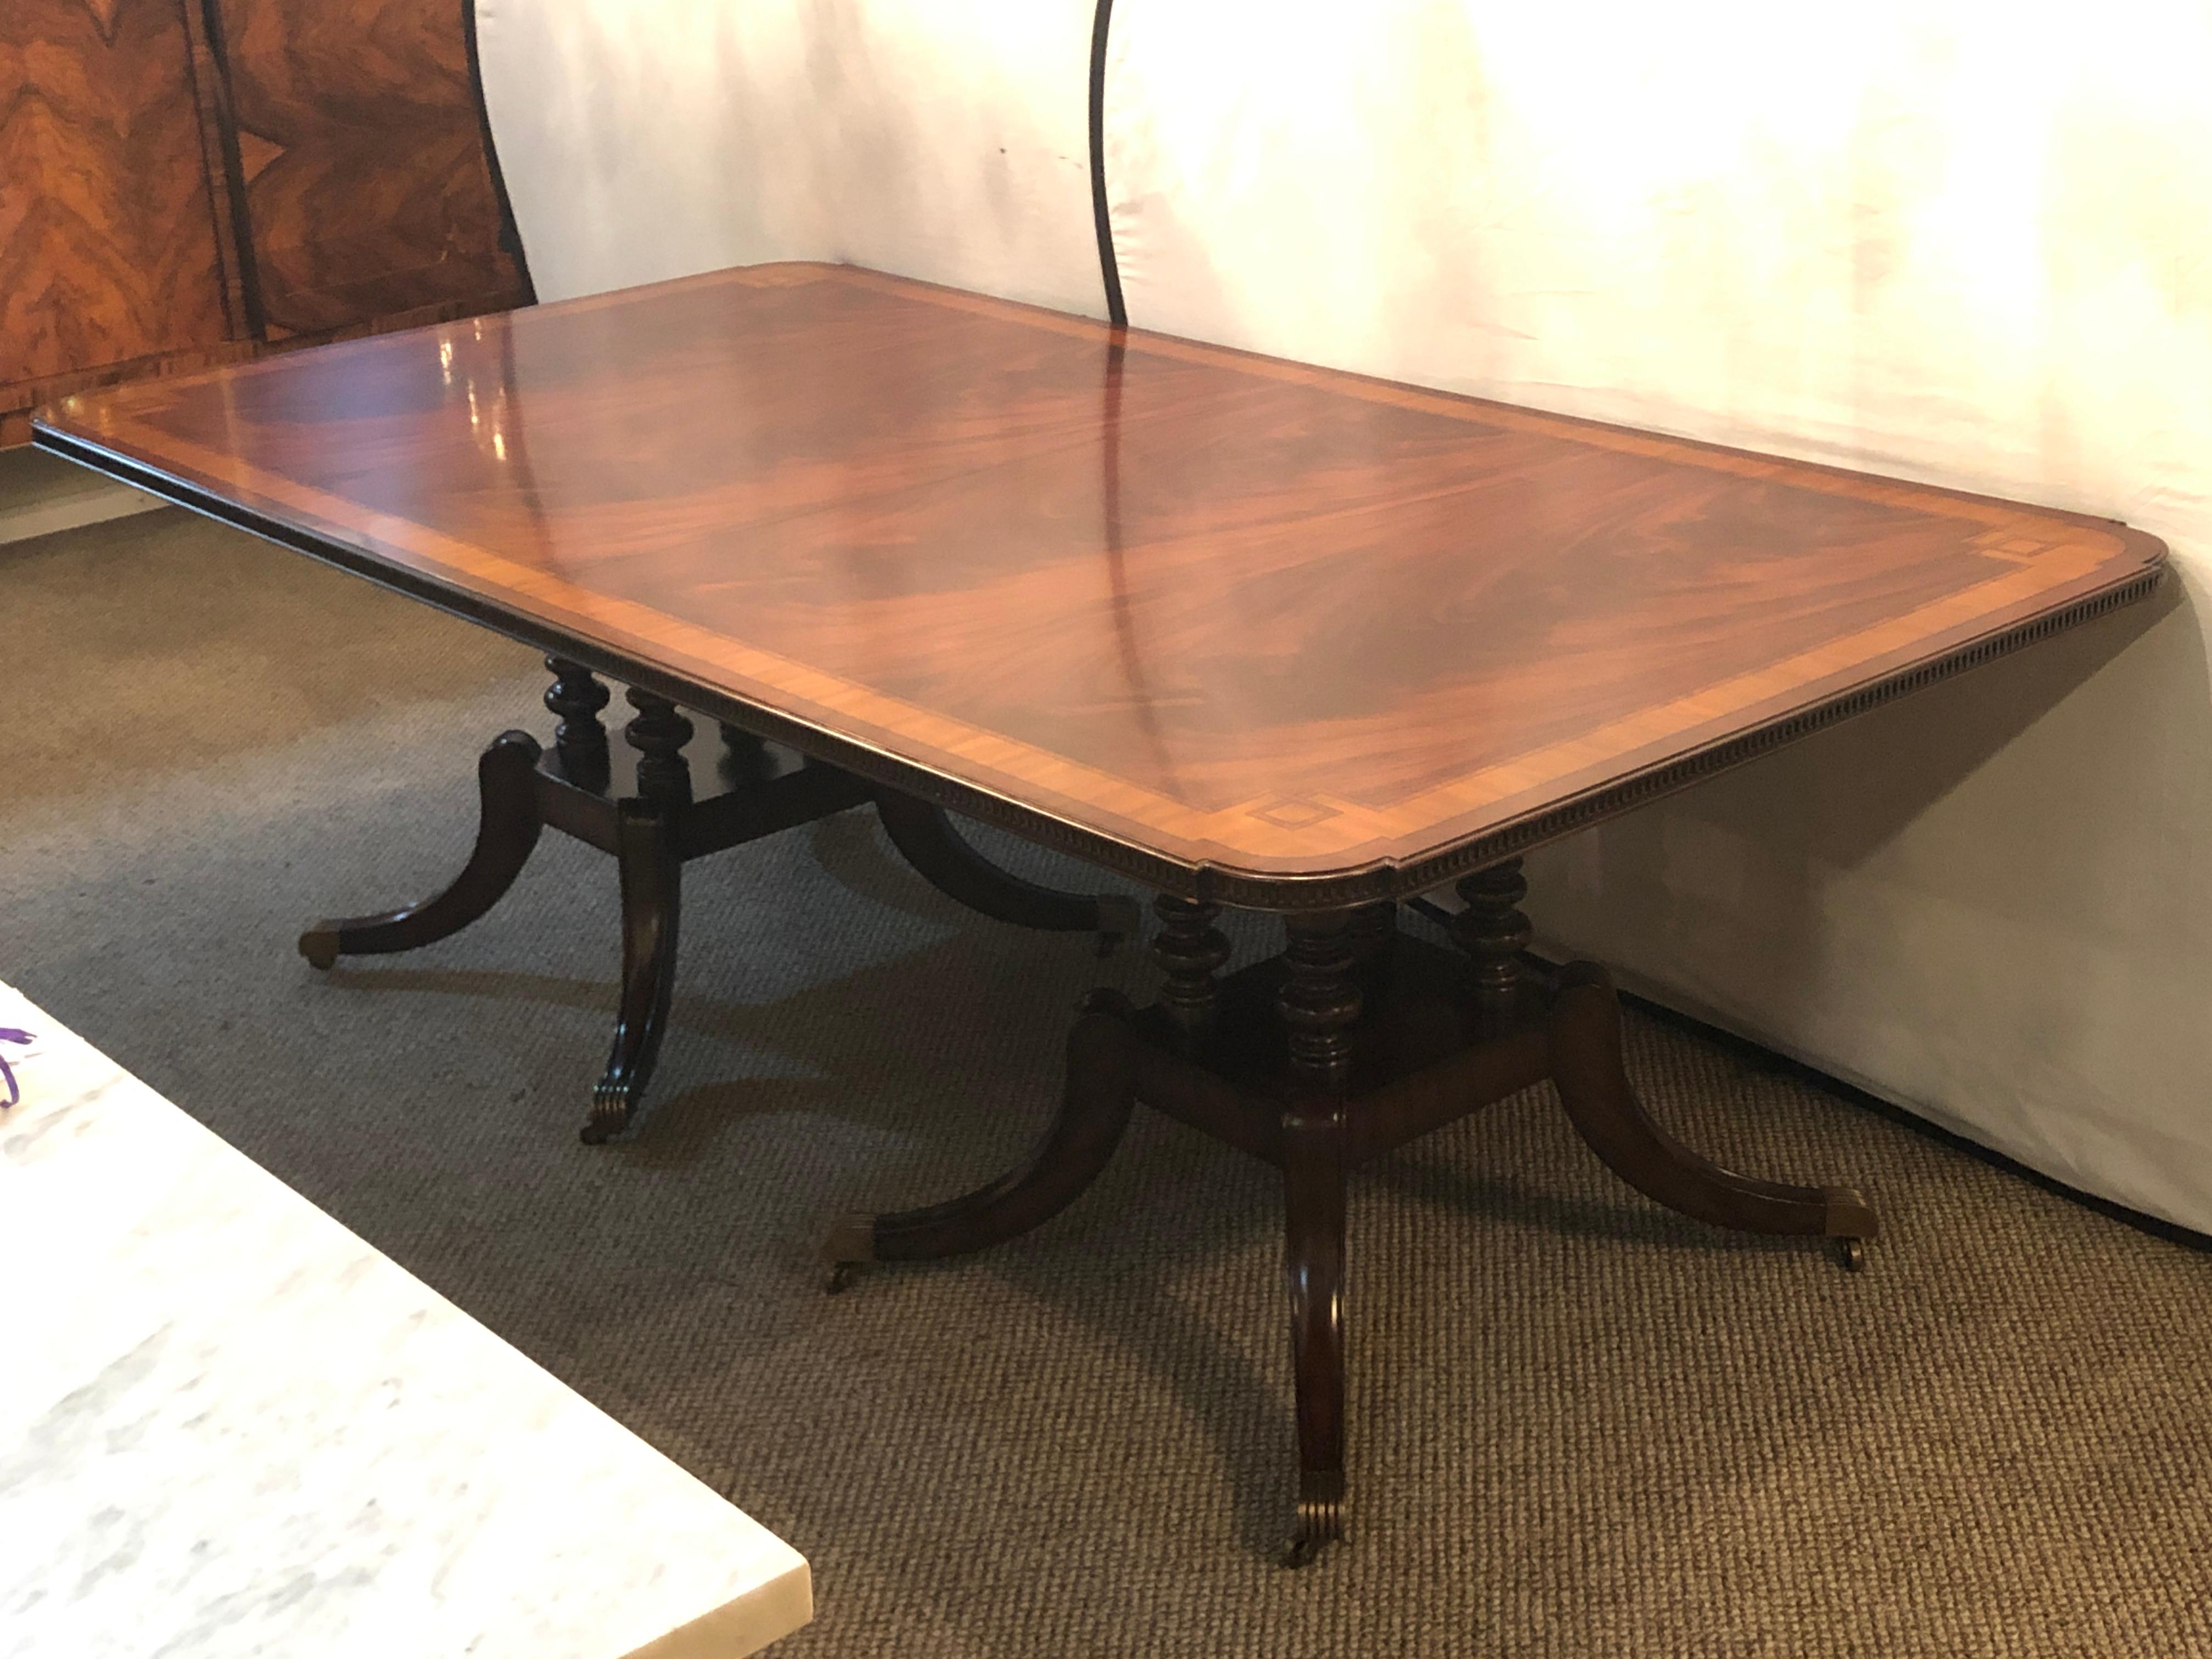 Crotch mahogany satinwood banded double pedestal quad leg dining table with two 21 inch leaves. Fine quad legged base on two pedestals with an amazing table top of ebony and satinwood inlays on a flame mahogany background.

 